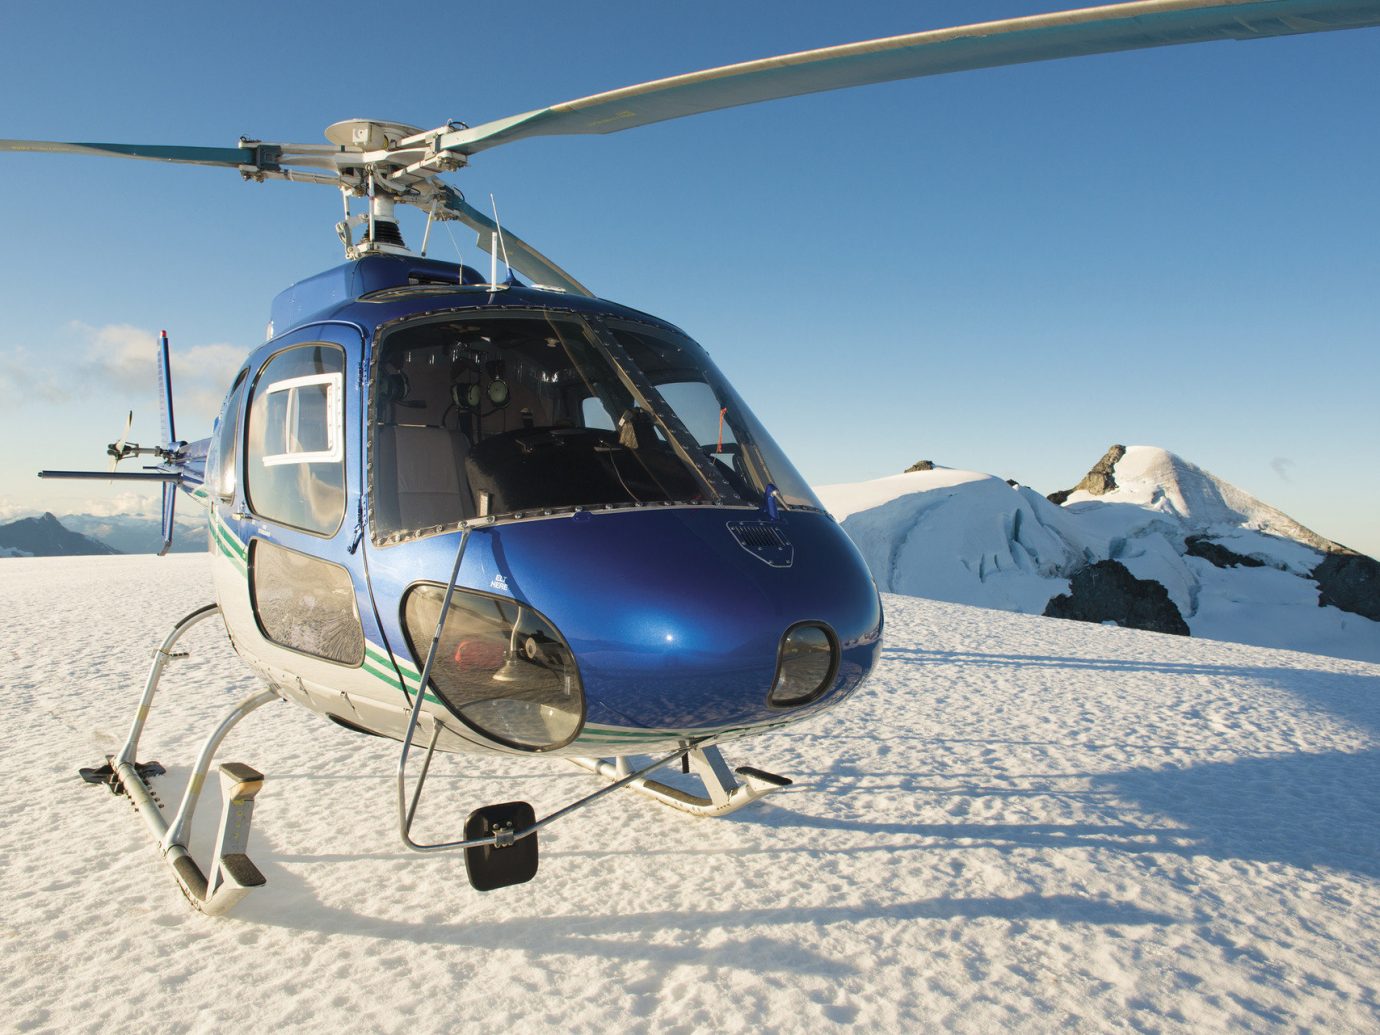 helicopter Hotels isolation Luxury Travel Mountains remote snow transportation Winter sky outdoor vehicle helicopter rotor rotorcraft aircraft transport atmosphere of earth aviation military helicopter flight autogiro